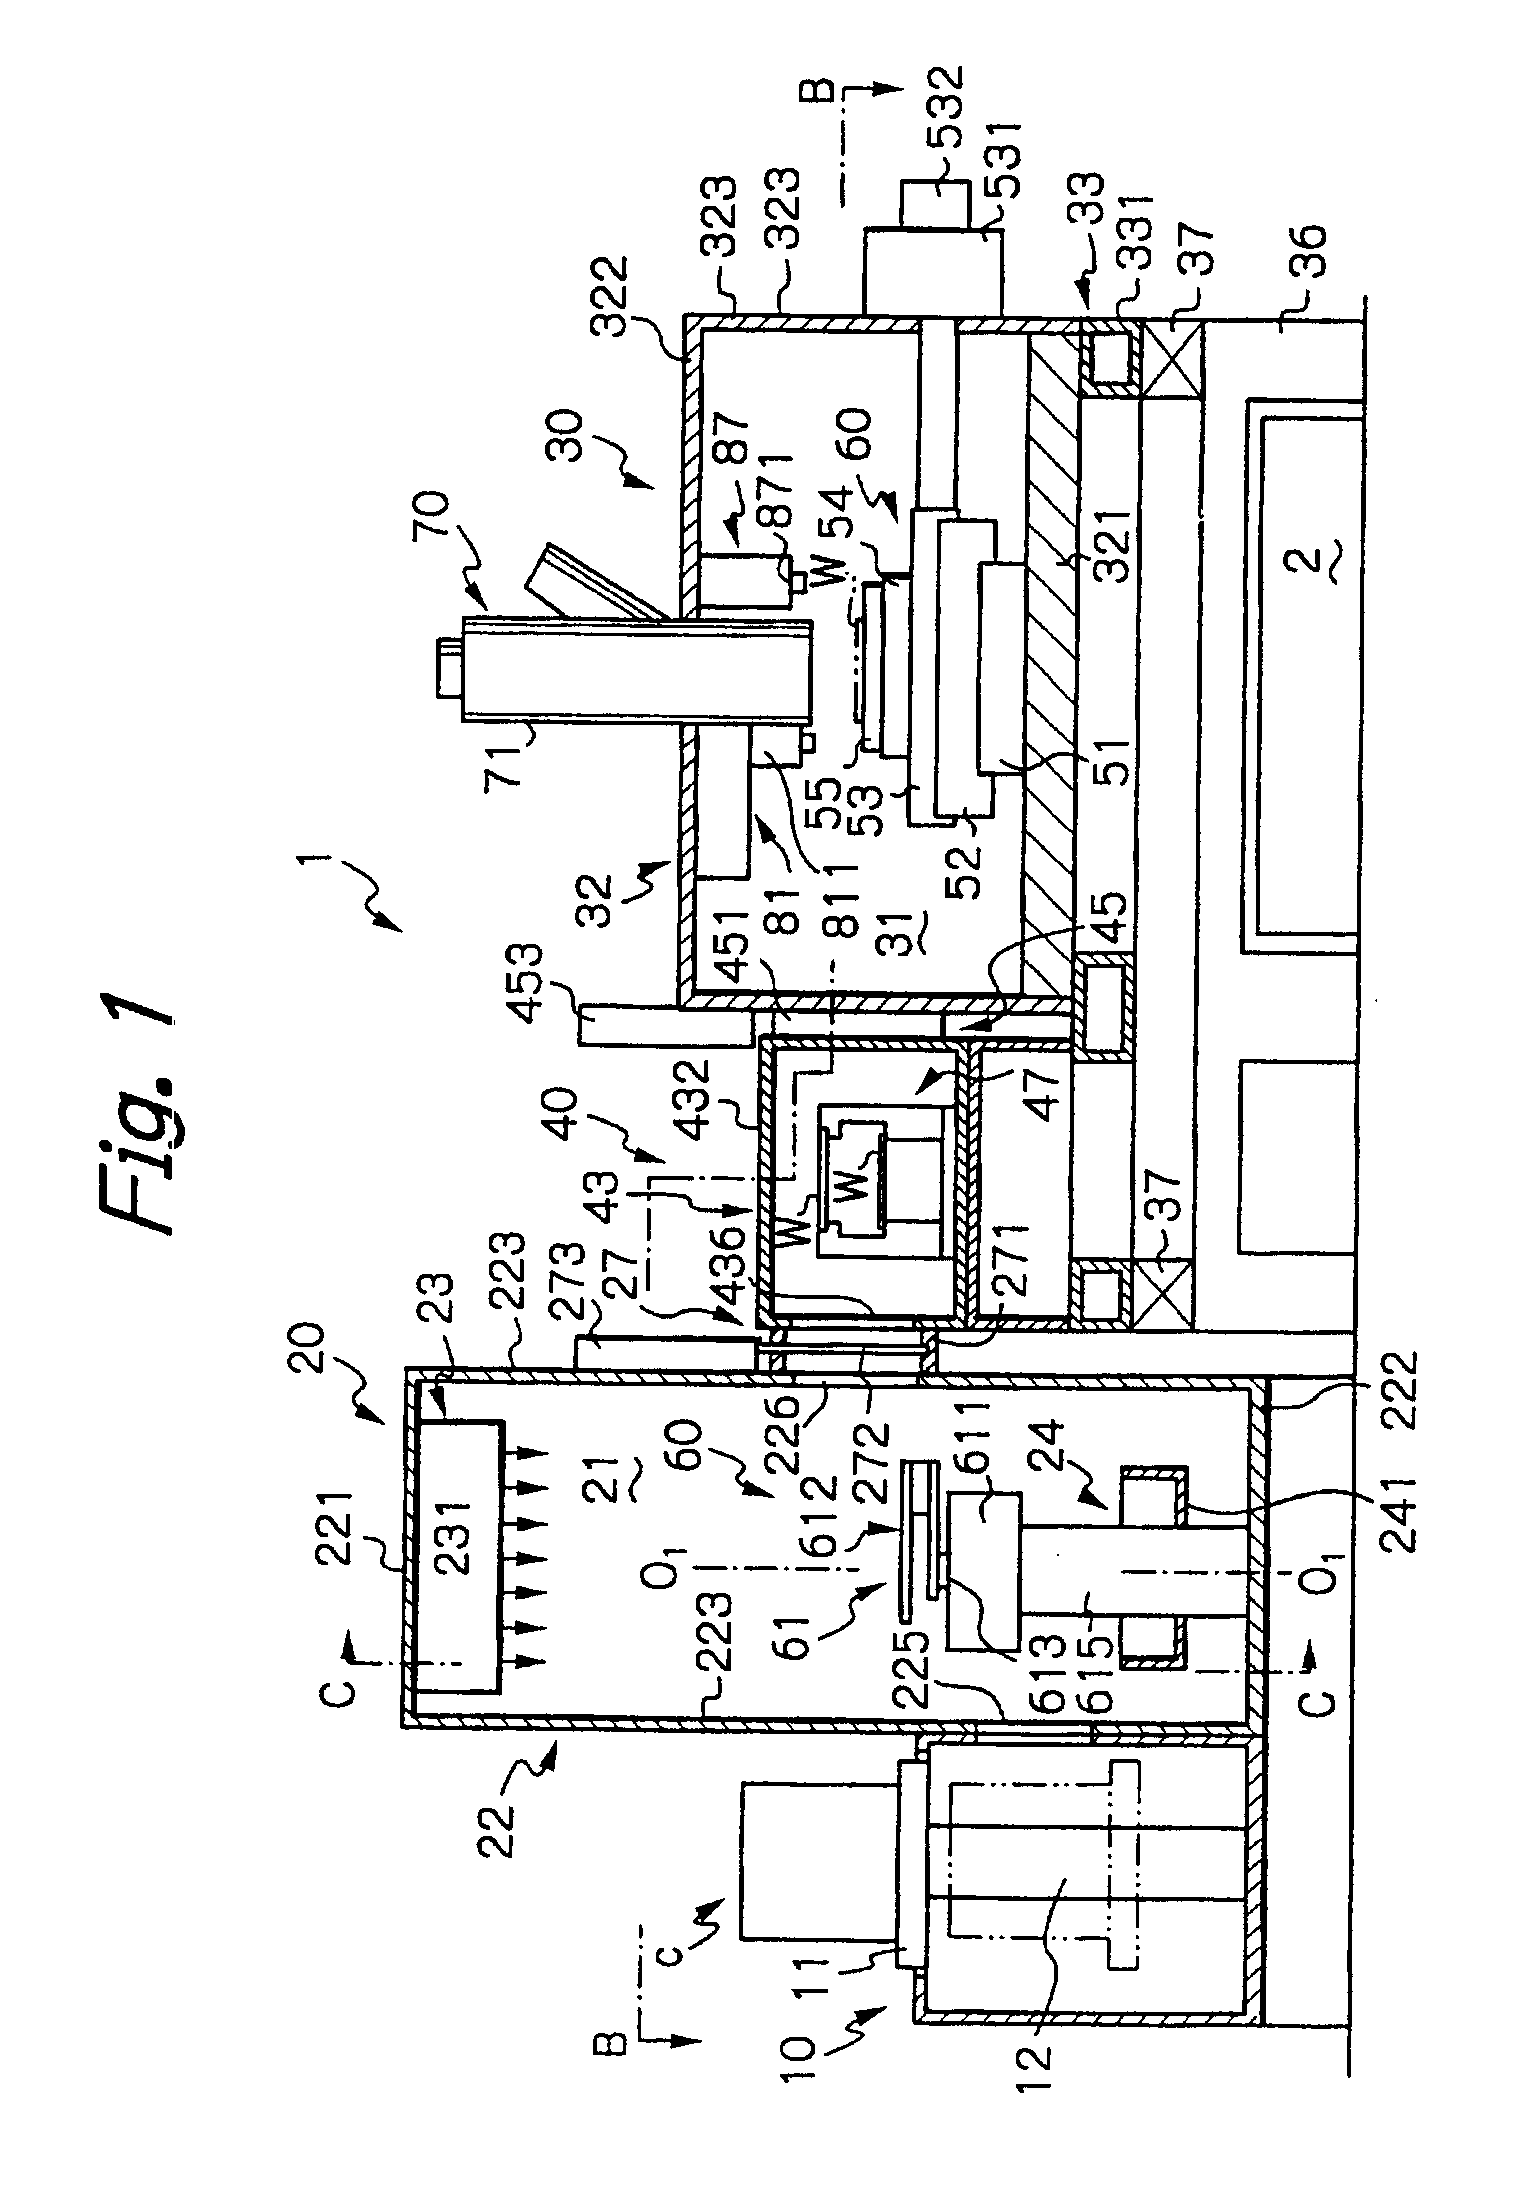 Electron beam apparatus and method of manufacturing semiconductor device using the apparatus